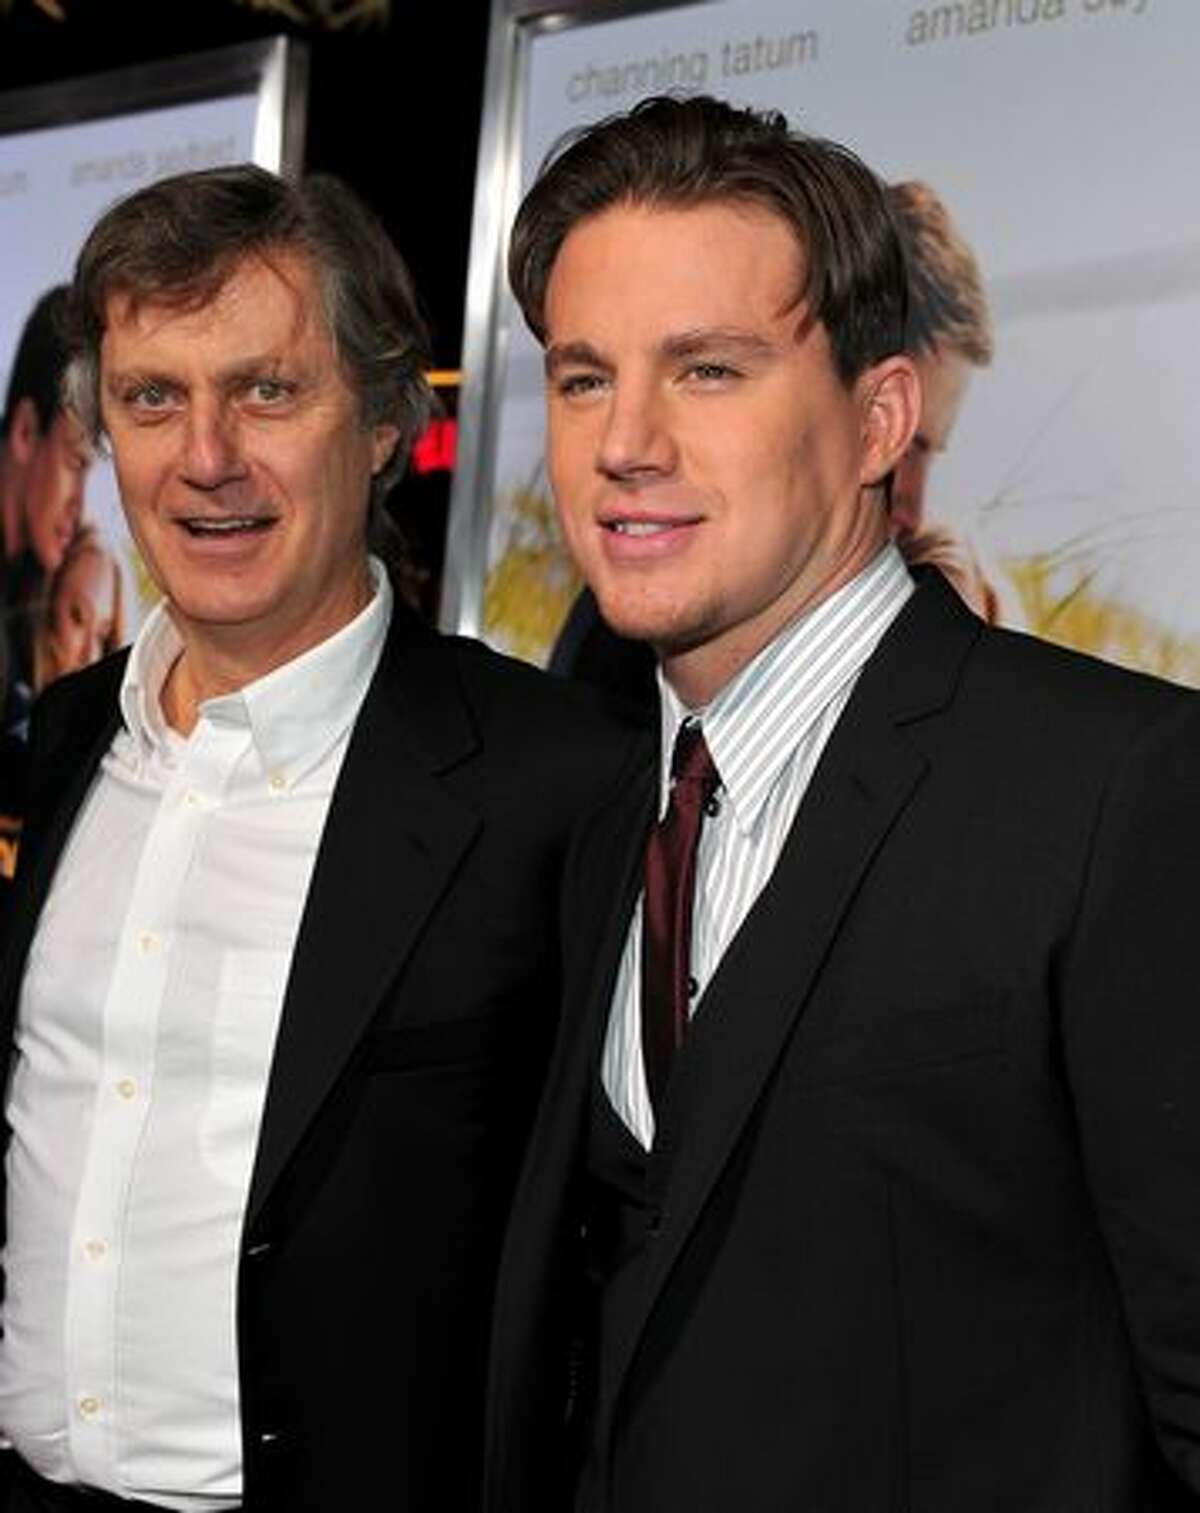 HOLLYWOOD - FEBRUARY 01: Director Lasse Halstrom and actor Channing Tatum arrive at the premiere of Screen Gem's "Dear John" at Grauman's Chinese Theater on February 1, 2010 in Hollywood, California.